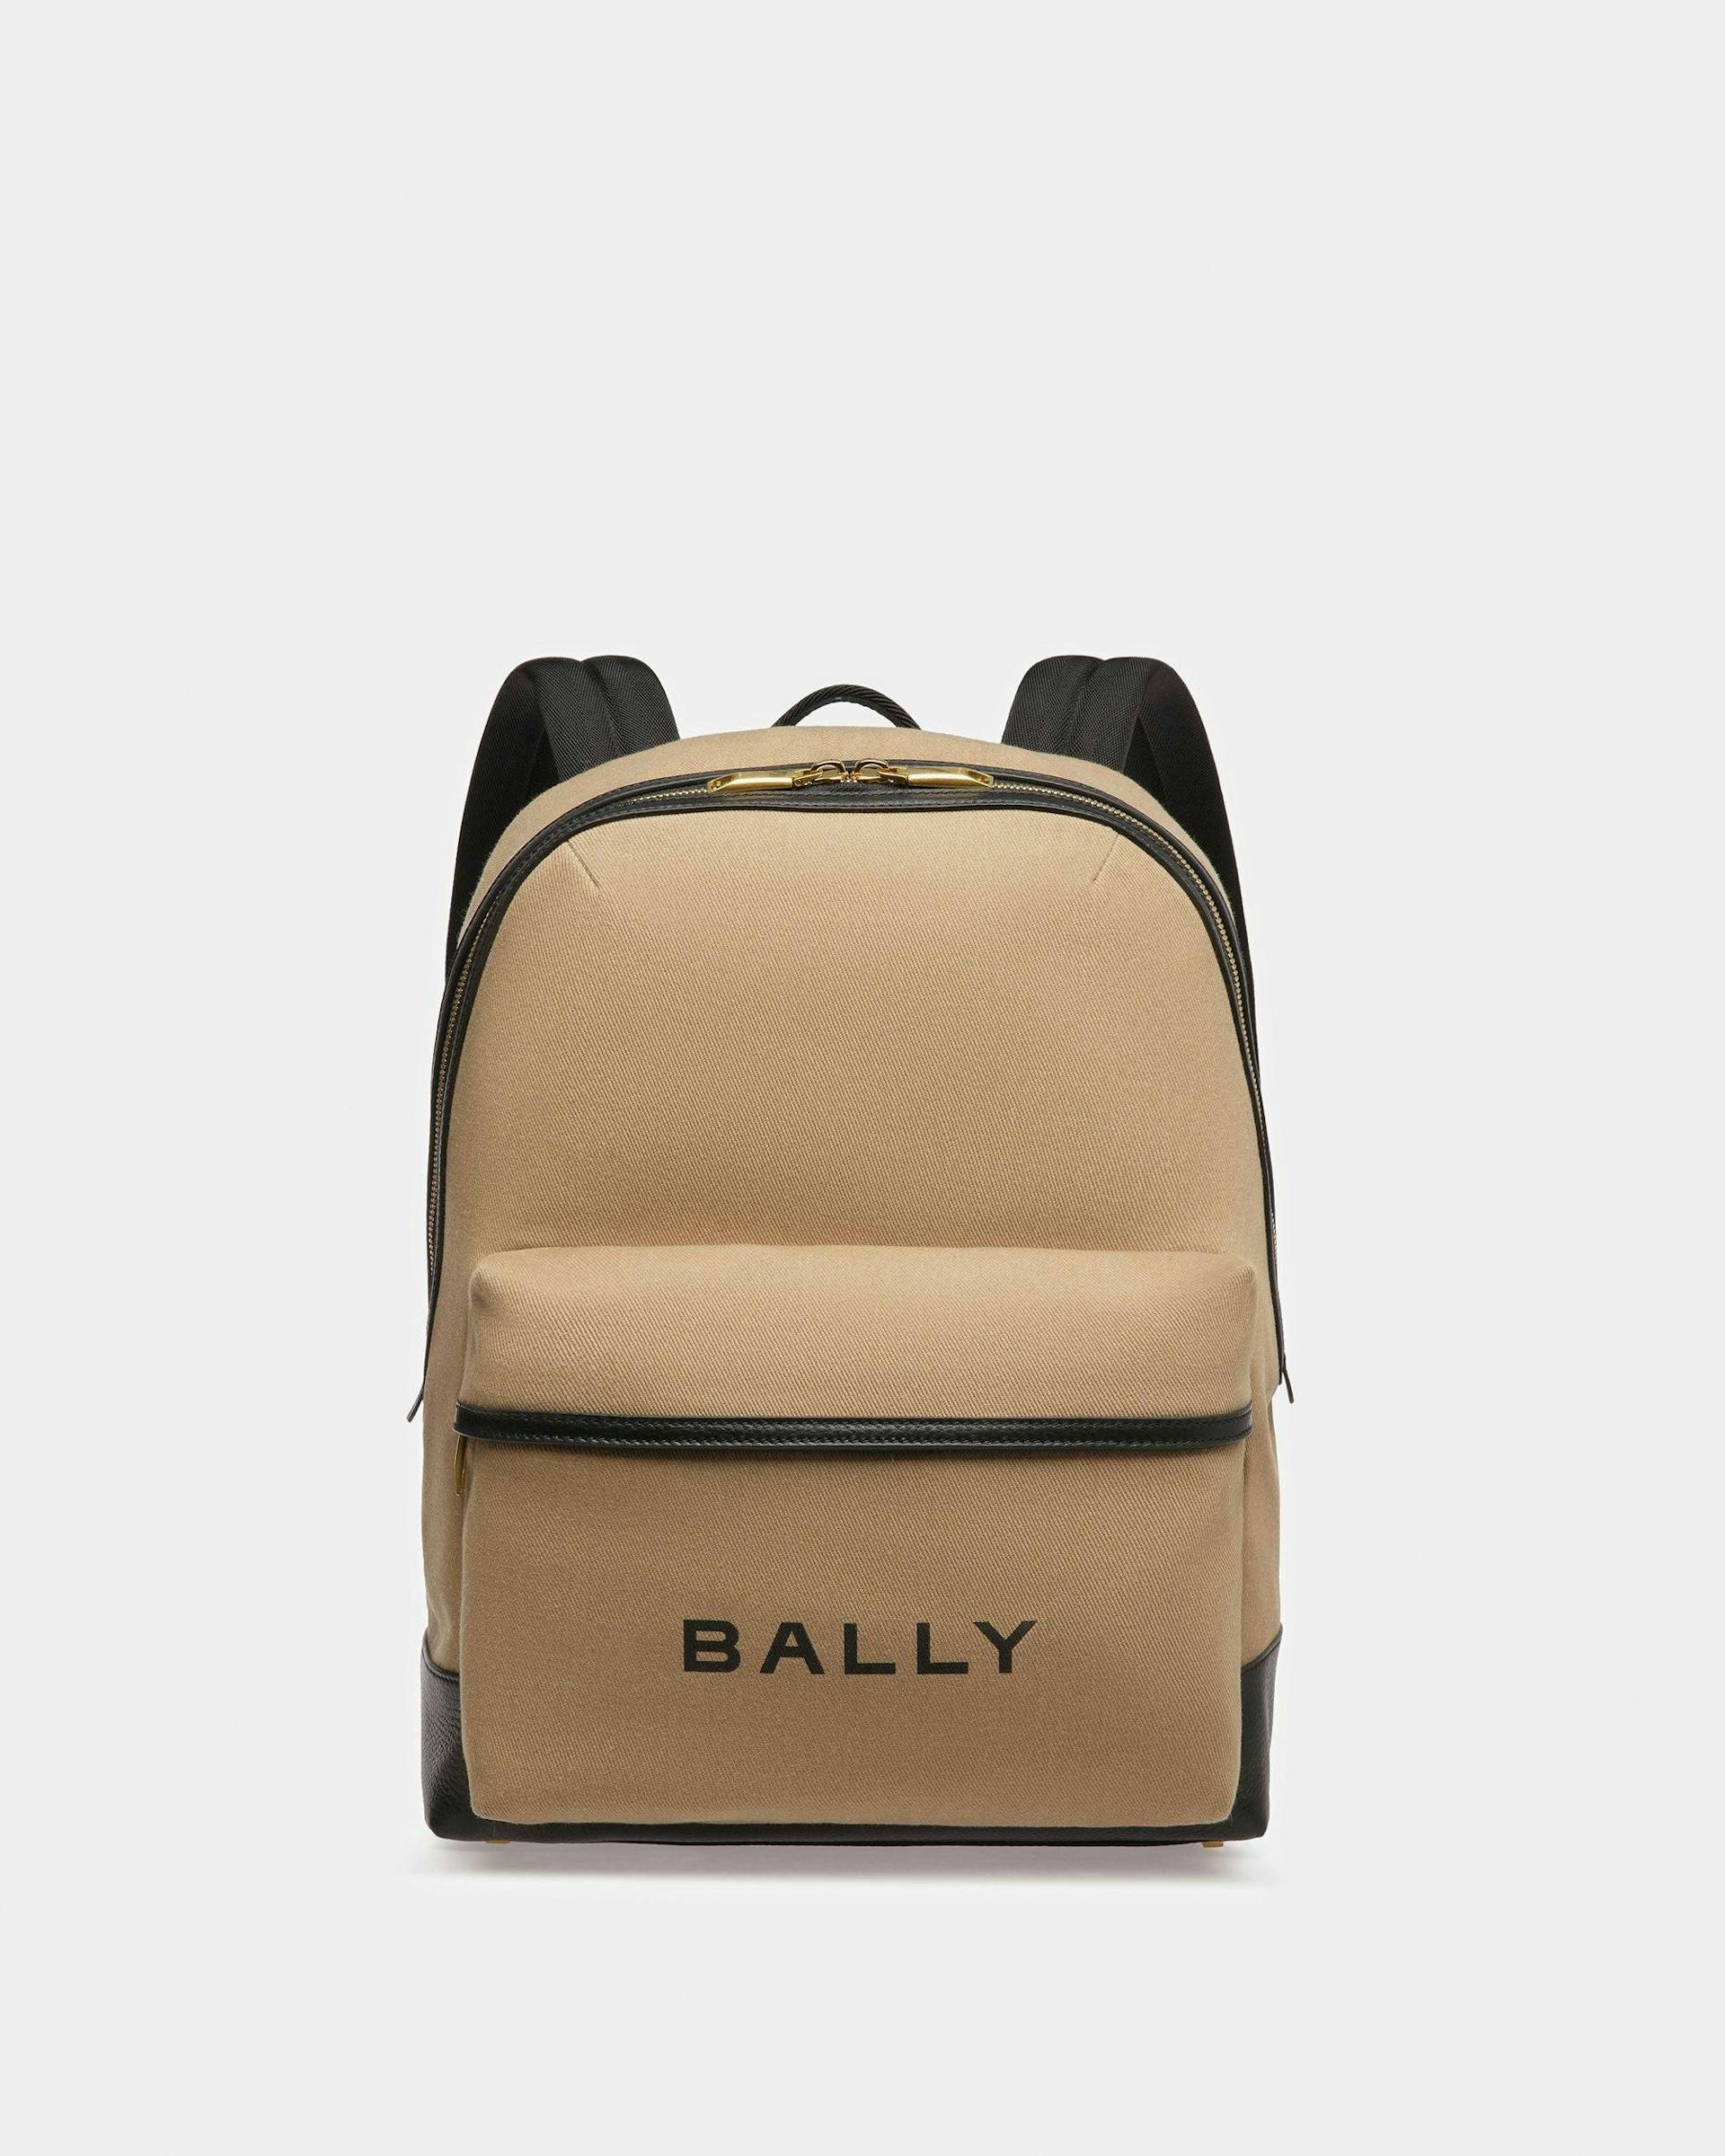 Men's Bar Backpack In Sand And Black Fabric And Leather | Bally | Still Life Front